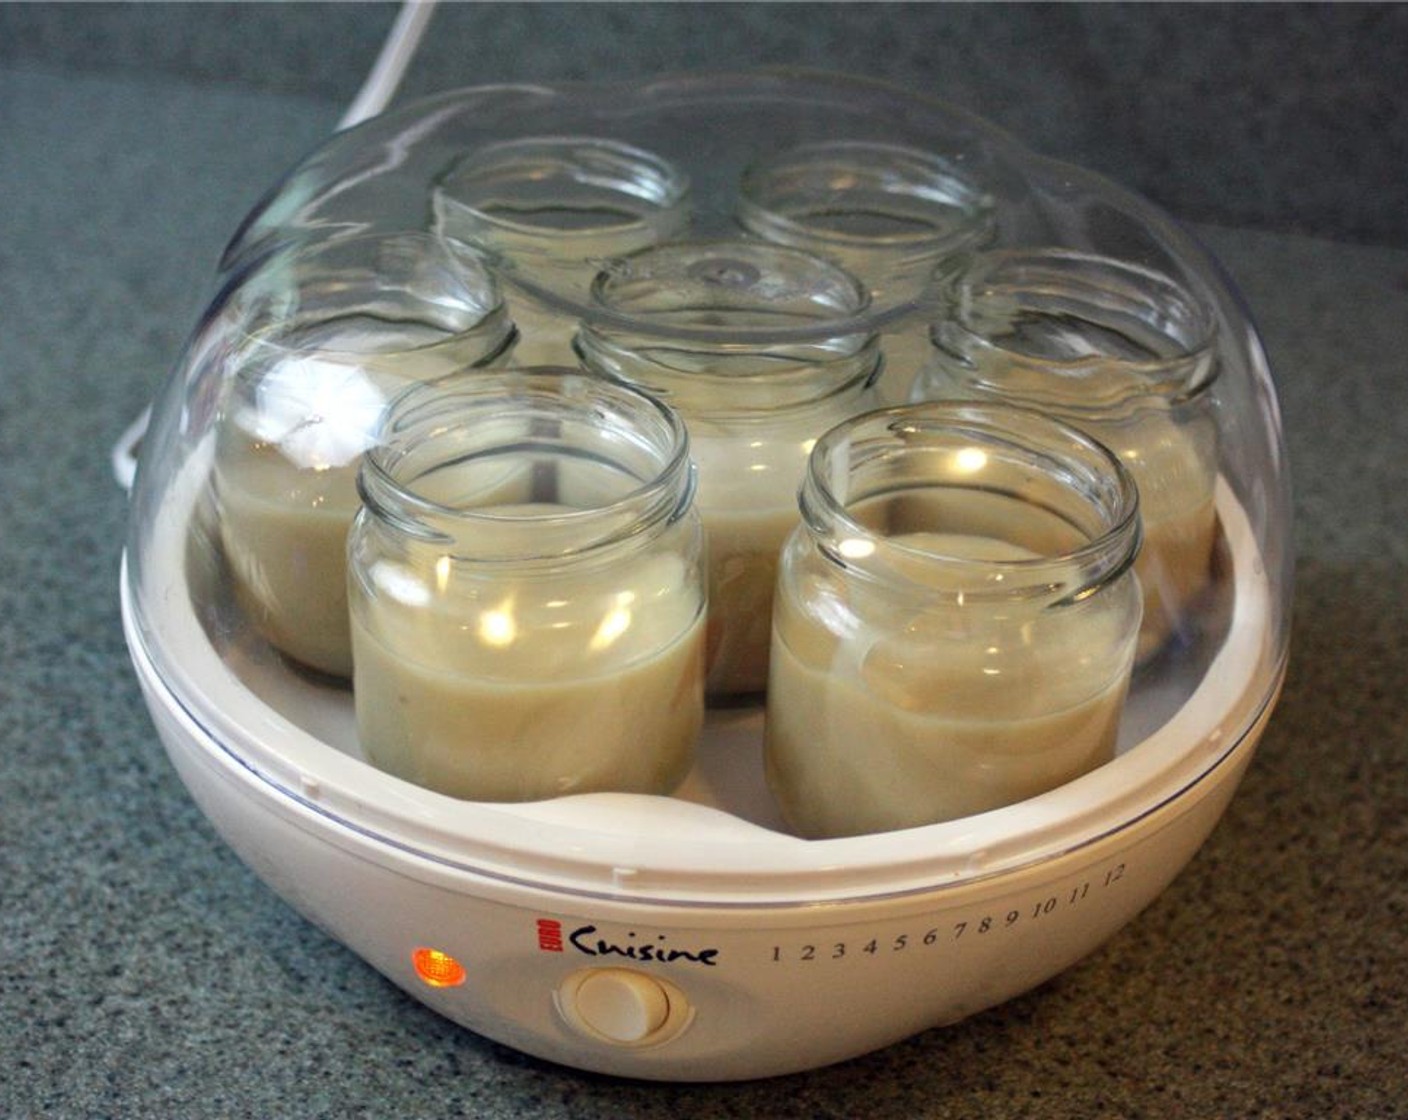 step 8 Add the Vegan Yogurt Starter (1 pckg) to the milk mixture once it reaches 105 degrees F (40 degrees C). Mix well then divide into your yogurt jars and place into the yogurt maker (with the lids off) for 7-9 hours.